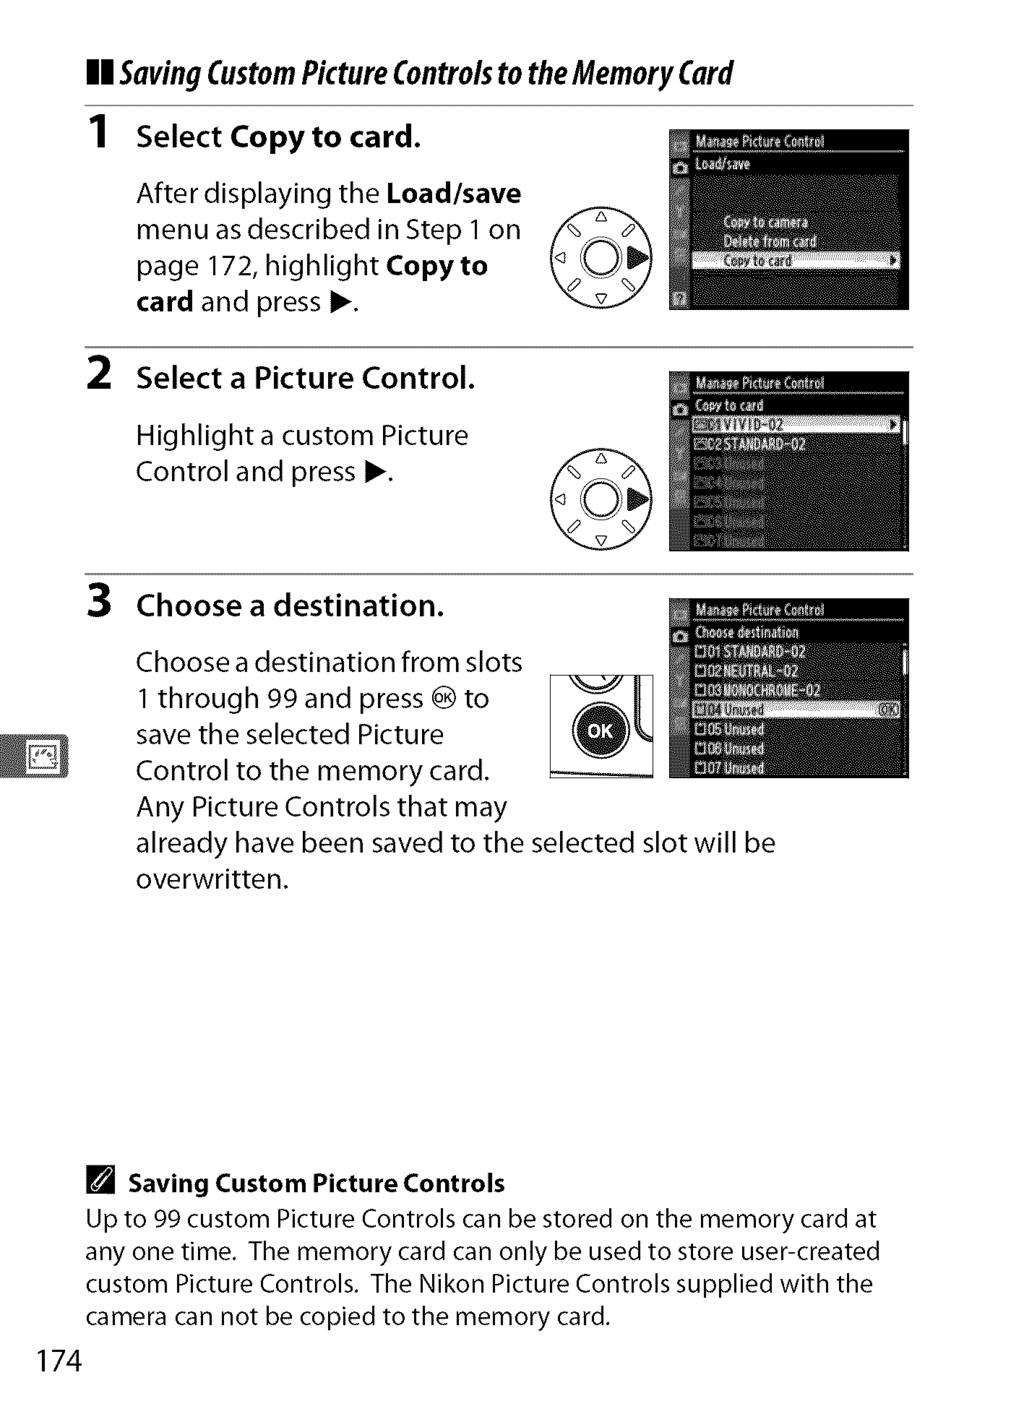 II SavingCustomPictureControls to the MemoryCard 1 Select Copyto card. After displaying the Load/save menu as described in Step I on page 172, highlight Copy to card and press I_.